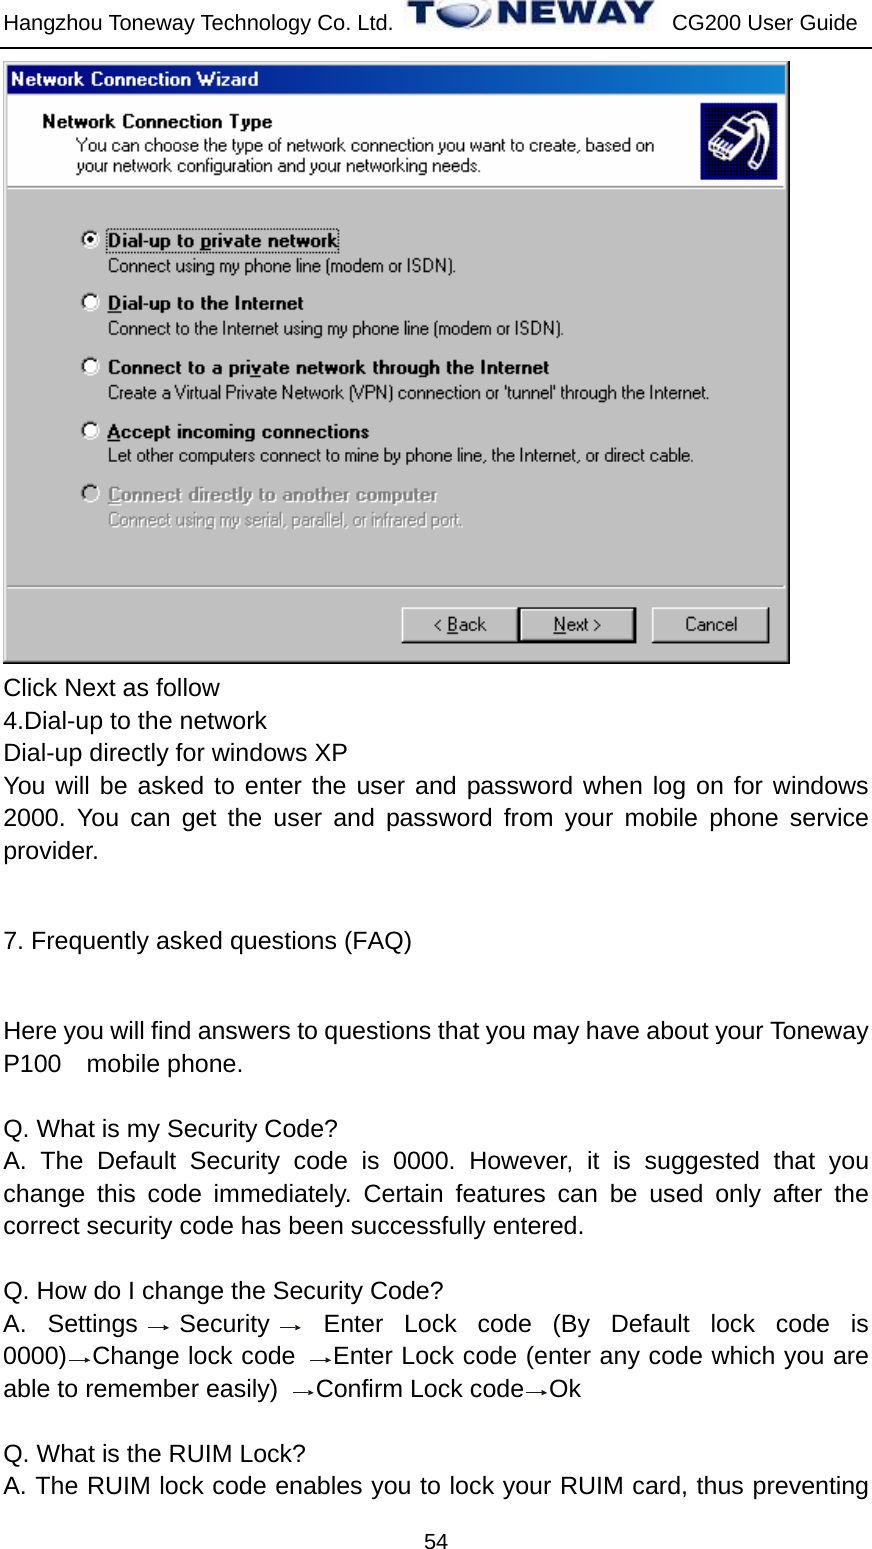 Hangzhou Toneway Technology Co. Ltd.    CG200 User Guide 54  Click Next as follow 4.Dial-up to the network Dial-up directly for windows XP You will be asked to enter the user and password when log on for windows 2000. You can get the user and password from your mobile phone service provider. 7. Frequently asked questions (FAQ) Here you will find answers to questions that you may have about your Toneway P100 mobile phone.    Q. What is my Security Code? A. The Default Security code is 0000. However, it is suggested that you change this code immediately. Certain features can be used only after the correct security code has been successfully entered.  Q. How do I change the Security Code? A. Settings Security  Enter Lock code (By Default lock code is 0000) Change lock code  Enter Lock code (enter any code which you are able to remember easily)  Confirm Lock code Ok  Q. What is the RUIM Lock? A. The RUIM lock code enables you to lock your RUIM card, thus preventing 